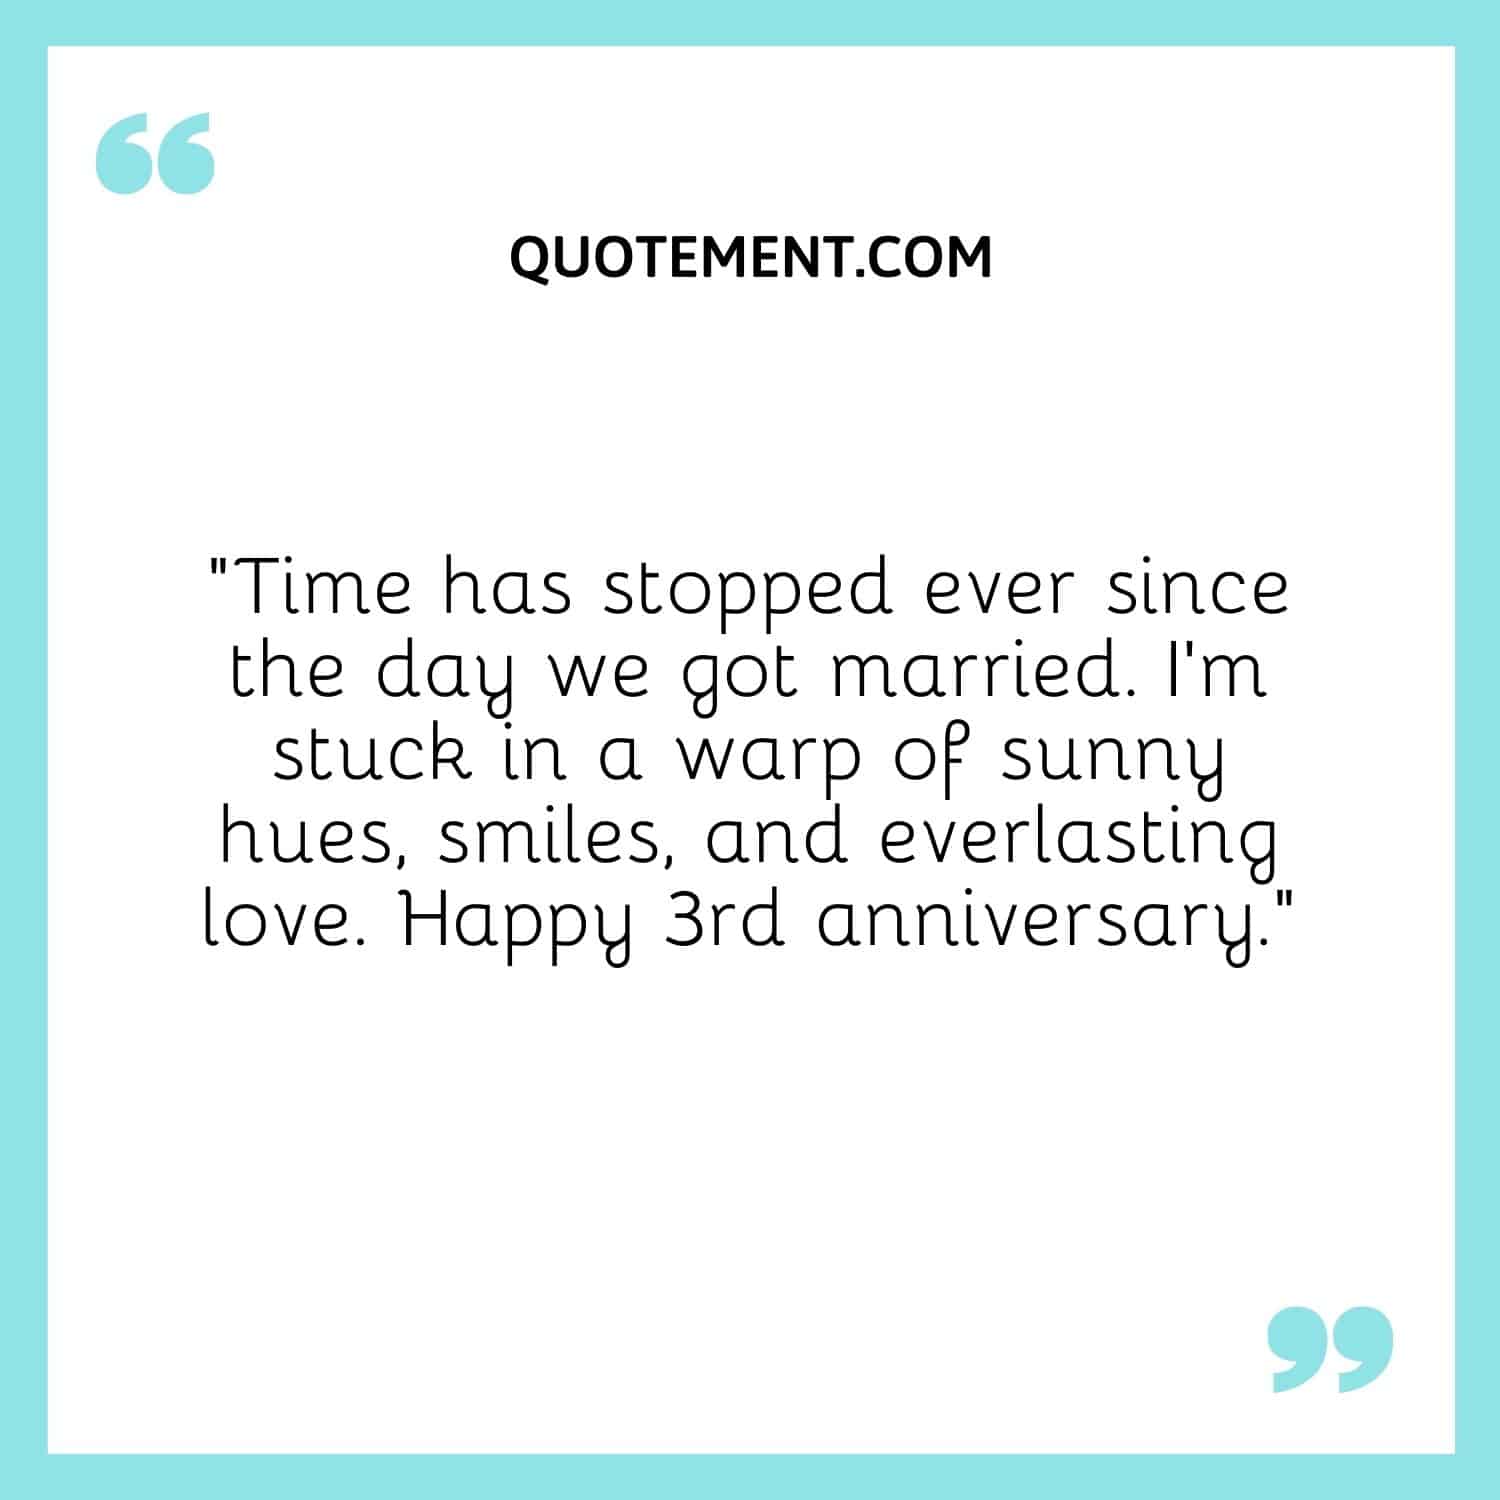 “Time has stopped ever since the day we got married. I’m stuck in a warp of sunny hues, smiles, and everlasting love. Happy 3rd anniversary.”